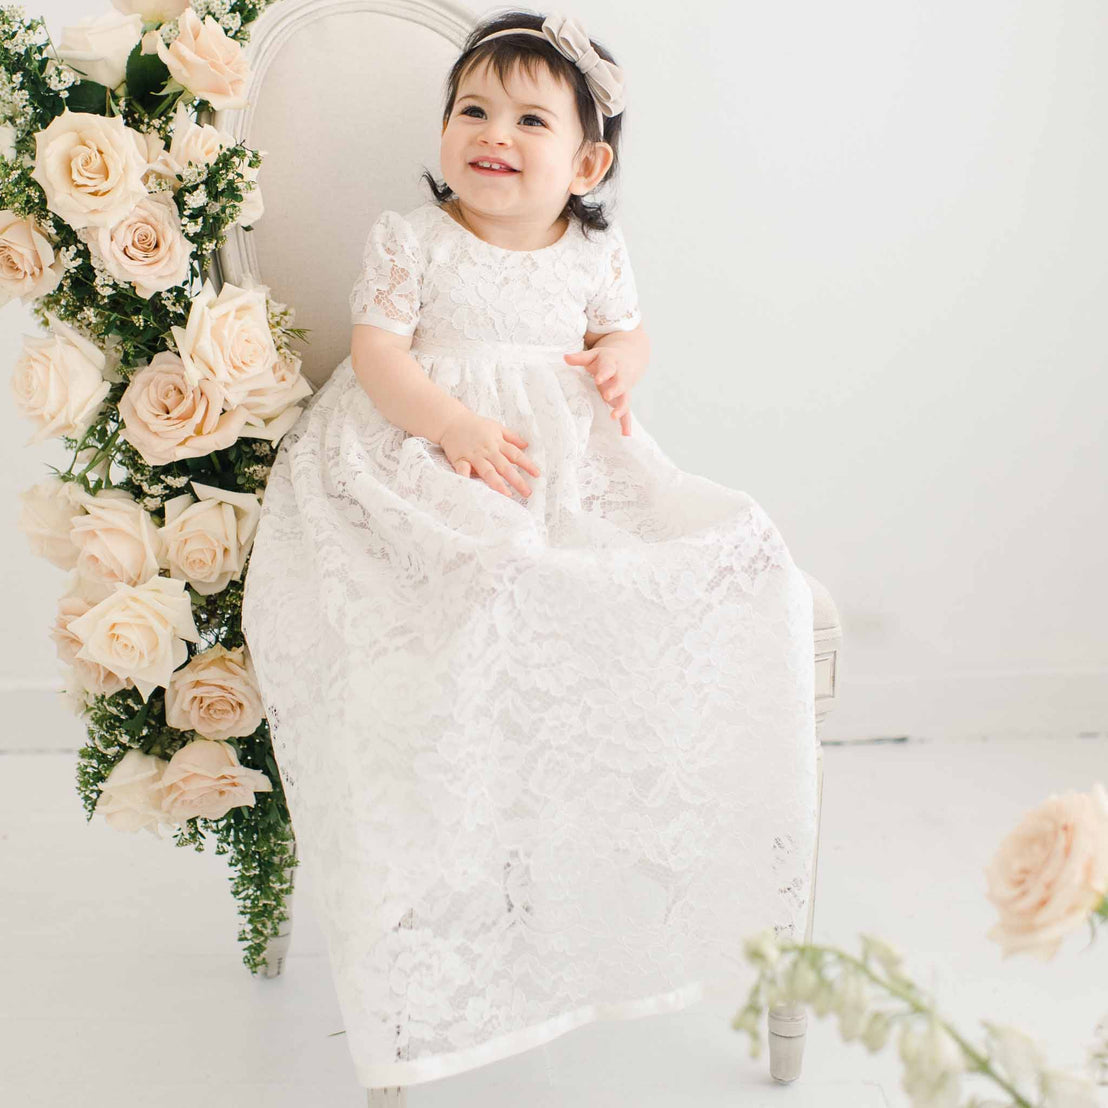 A toddler girl with a joyful smile, wearing an ivory lace Rose Christening gown and bonnet, sits on an elegant chair adorned with pink roses in a light, bright room.